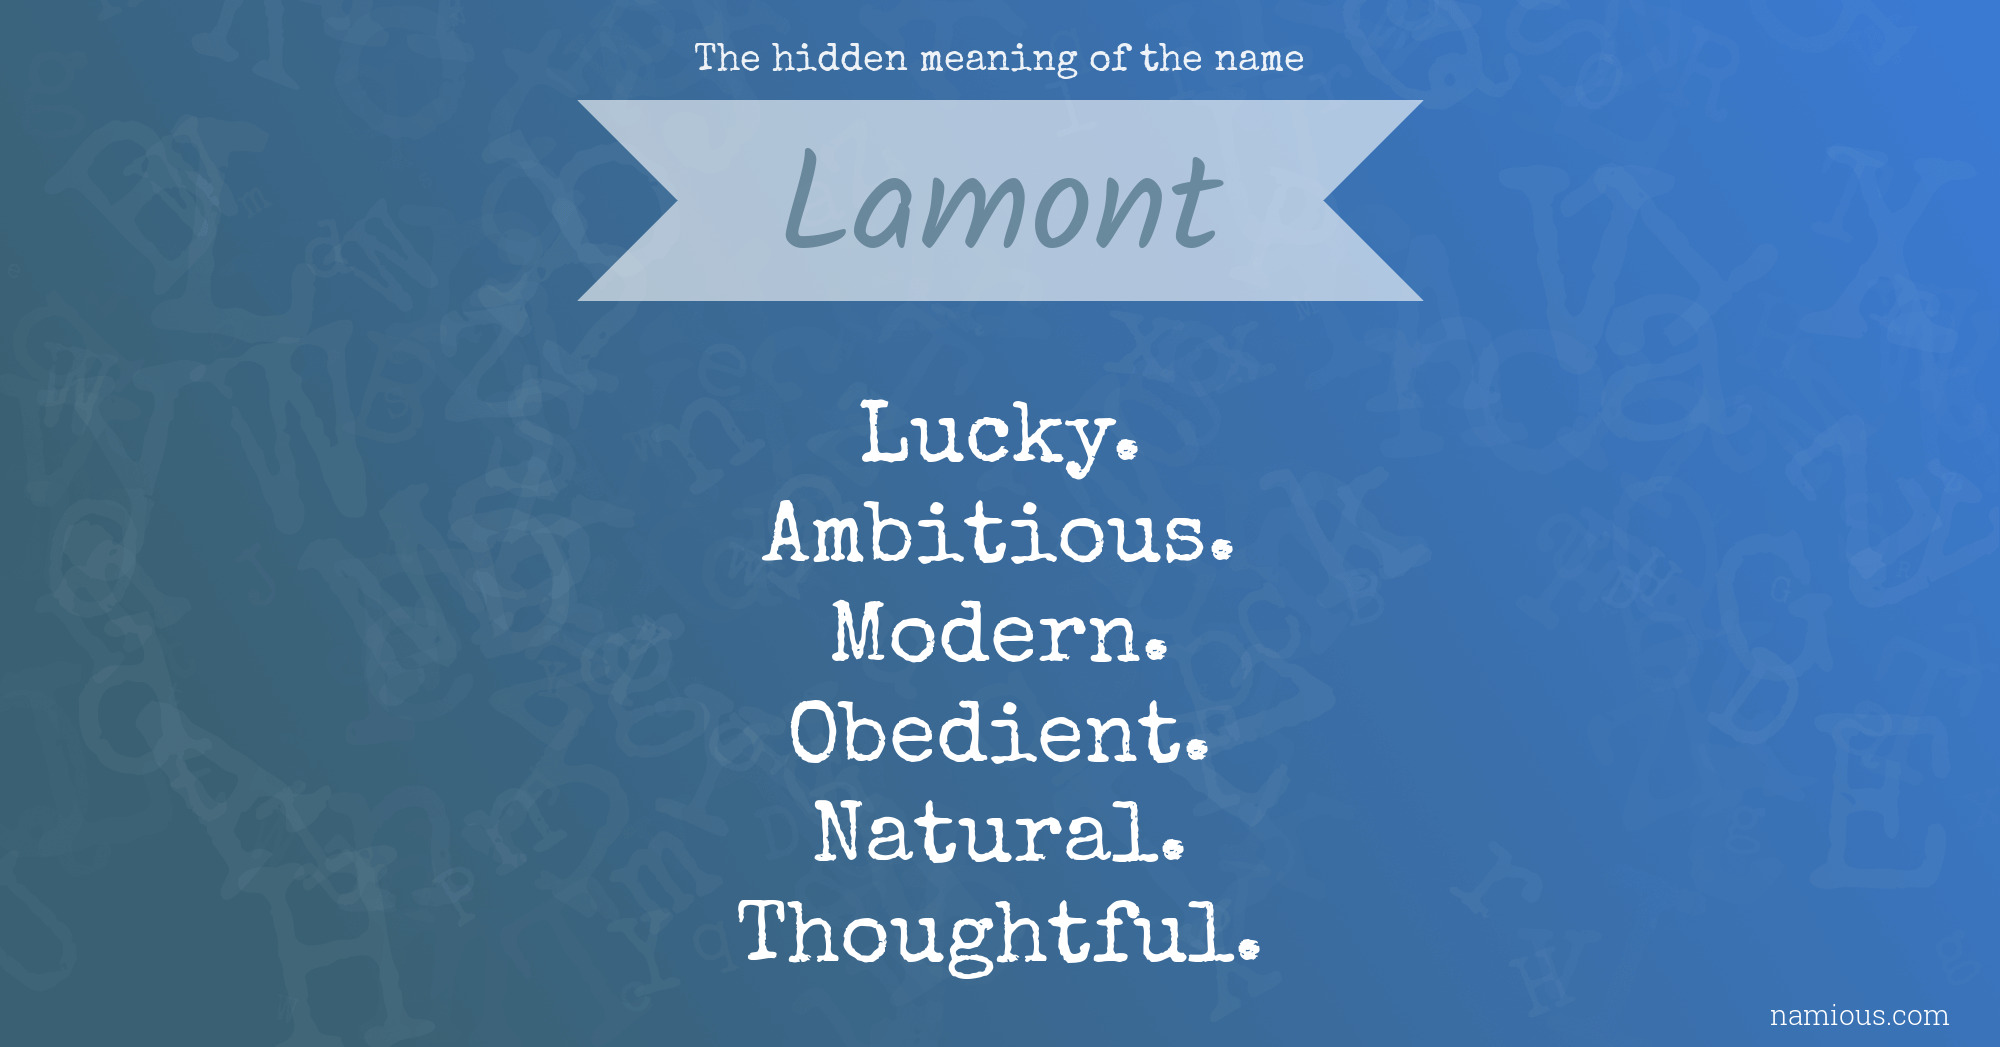 The hidden meaning of the name Lamont